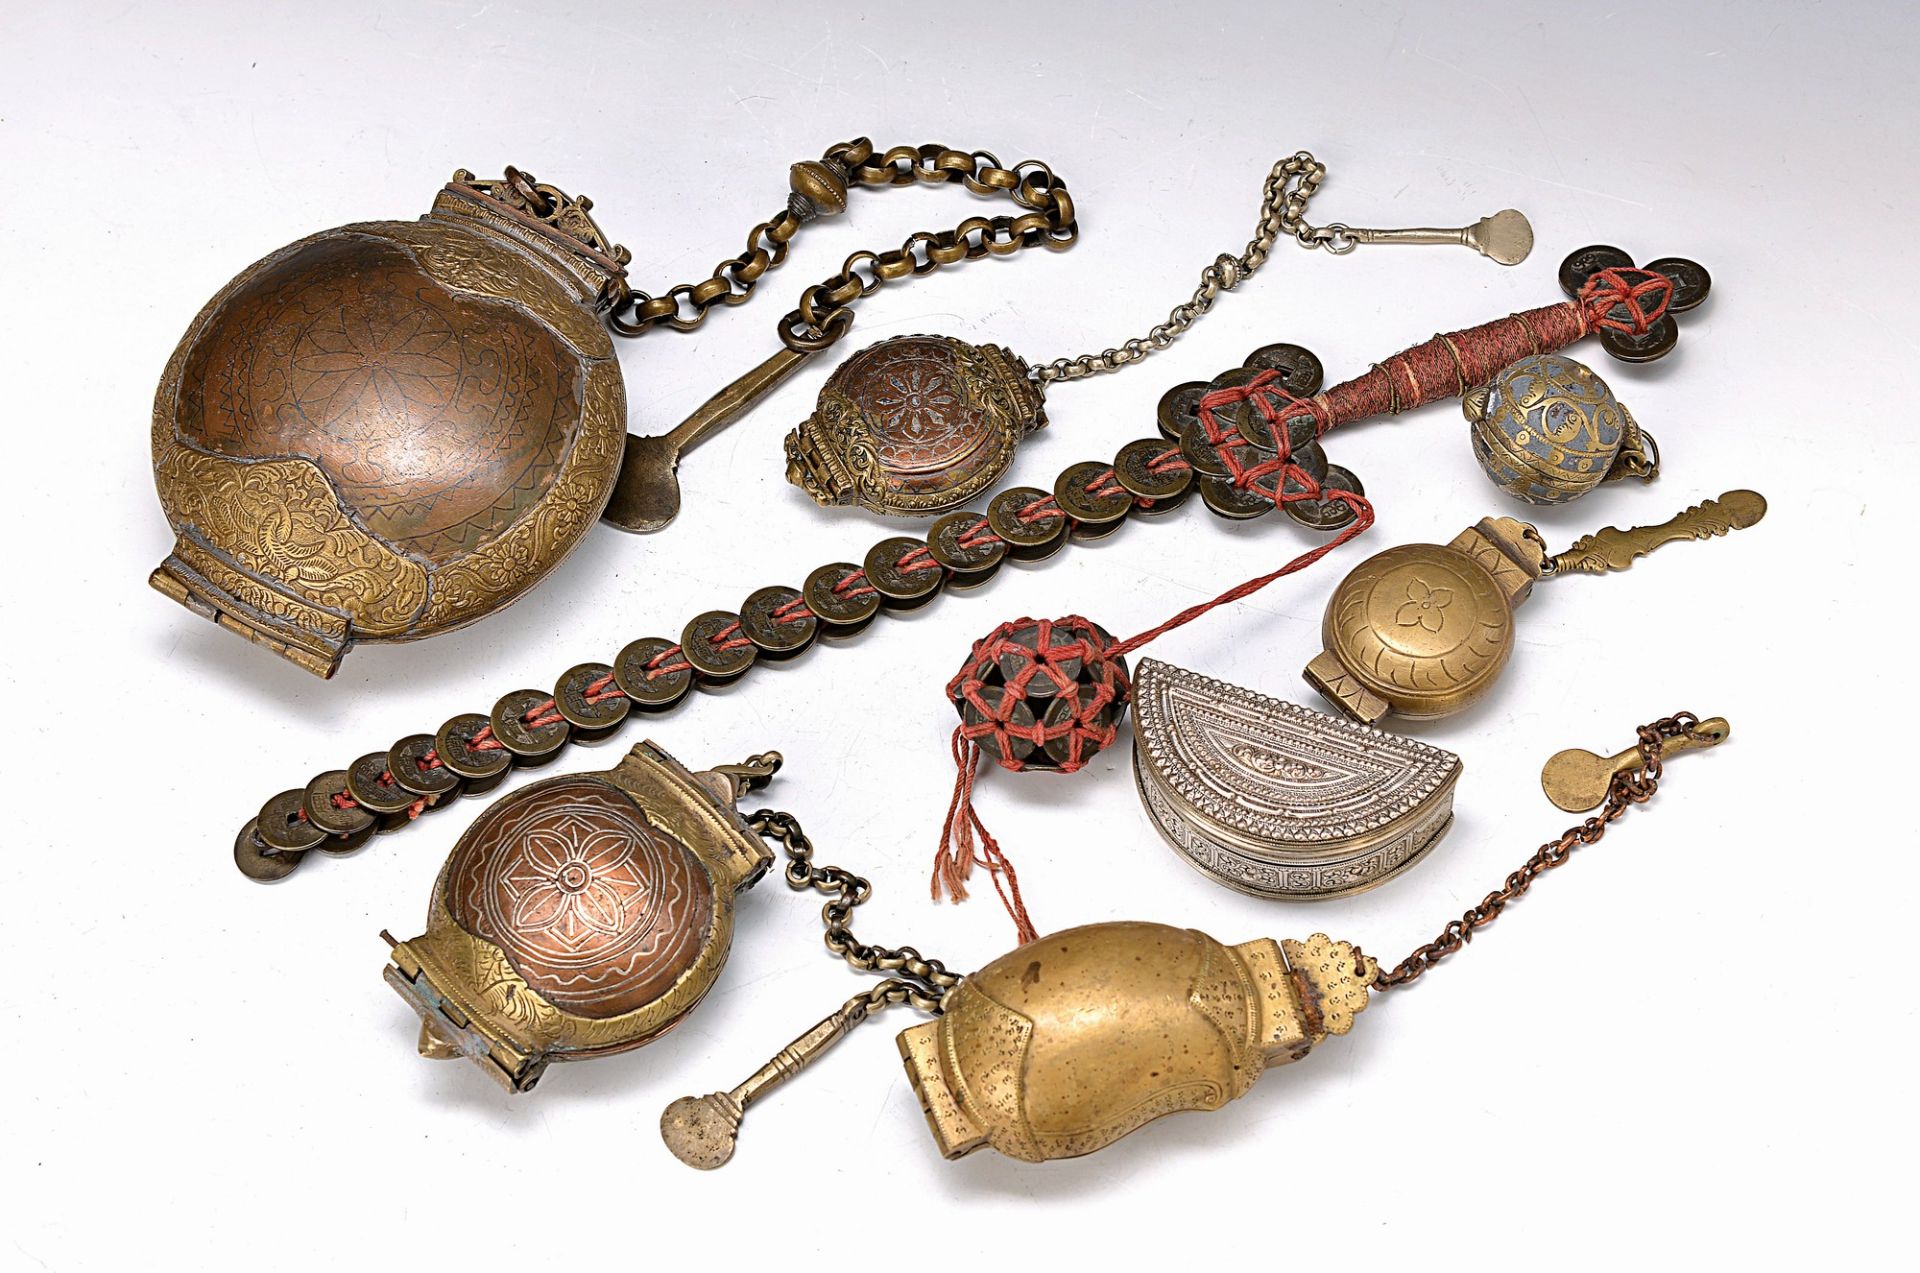 12 metal vessels for chalk or Betel, Indonesia, 19th c. and one "ghost sword", vessels of metal,